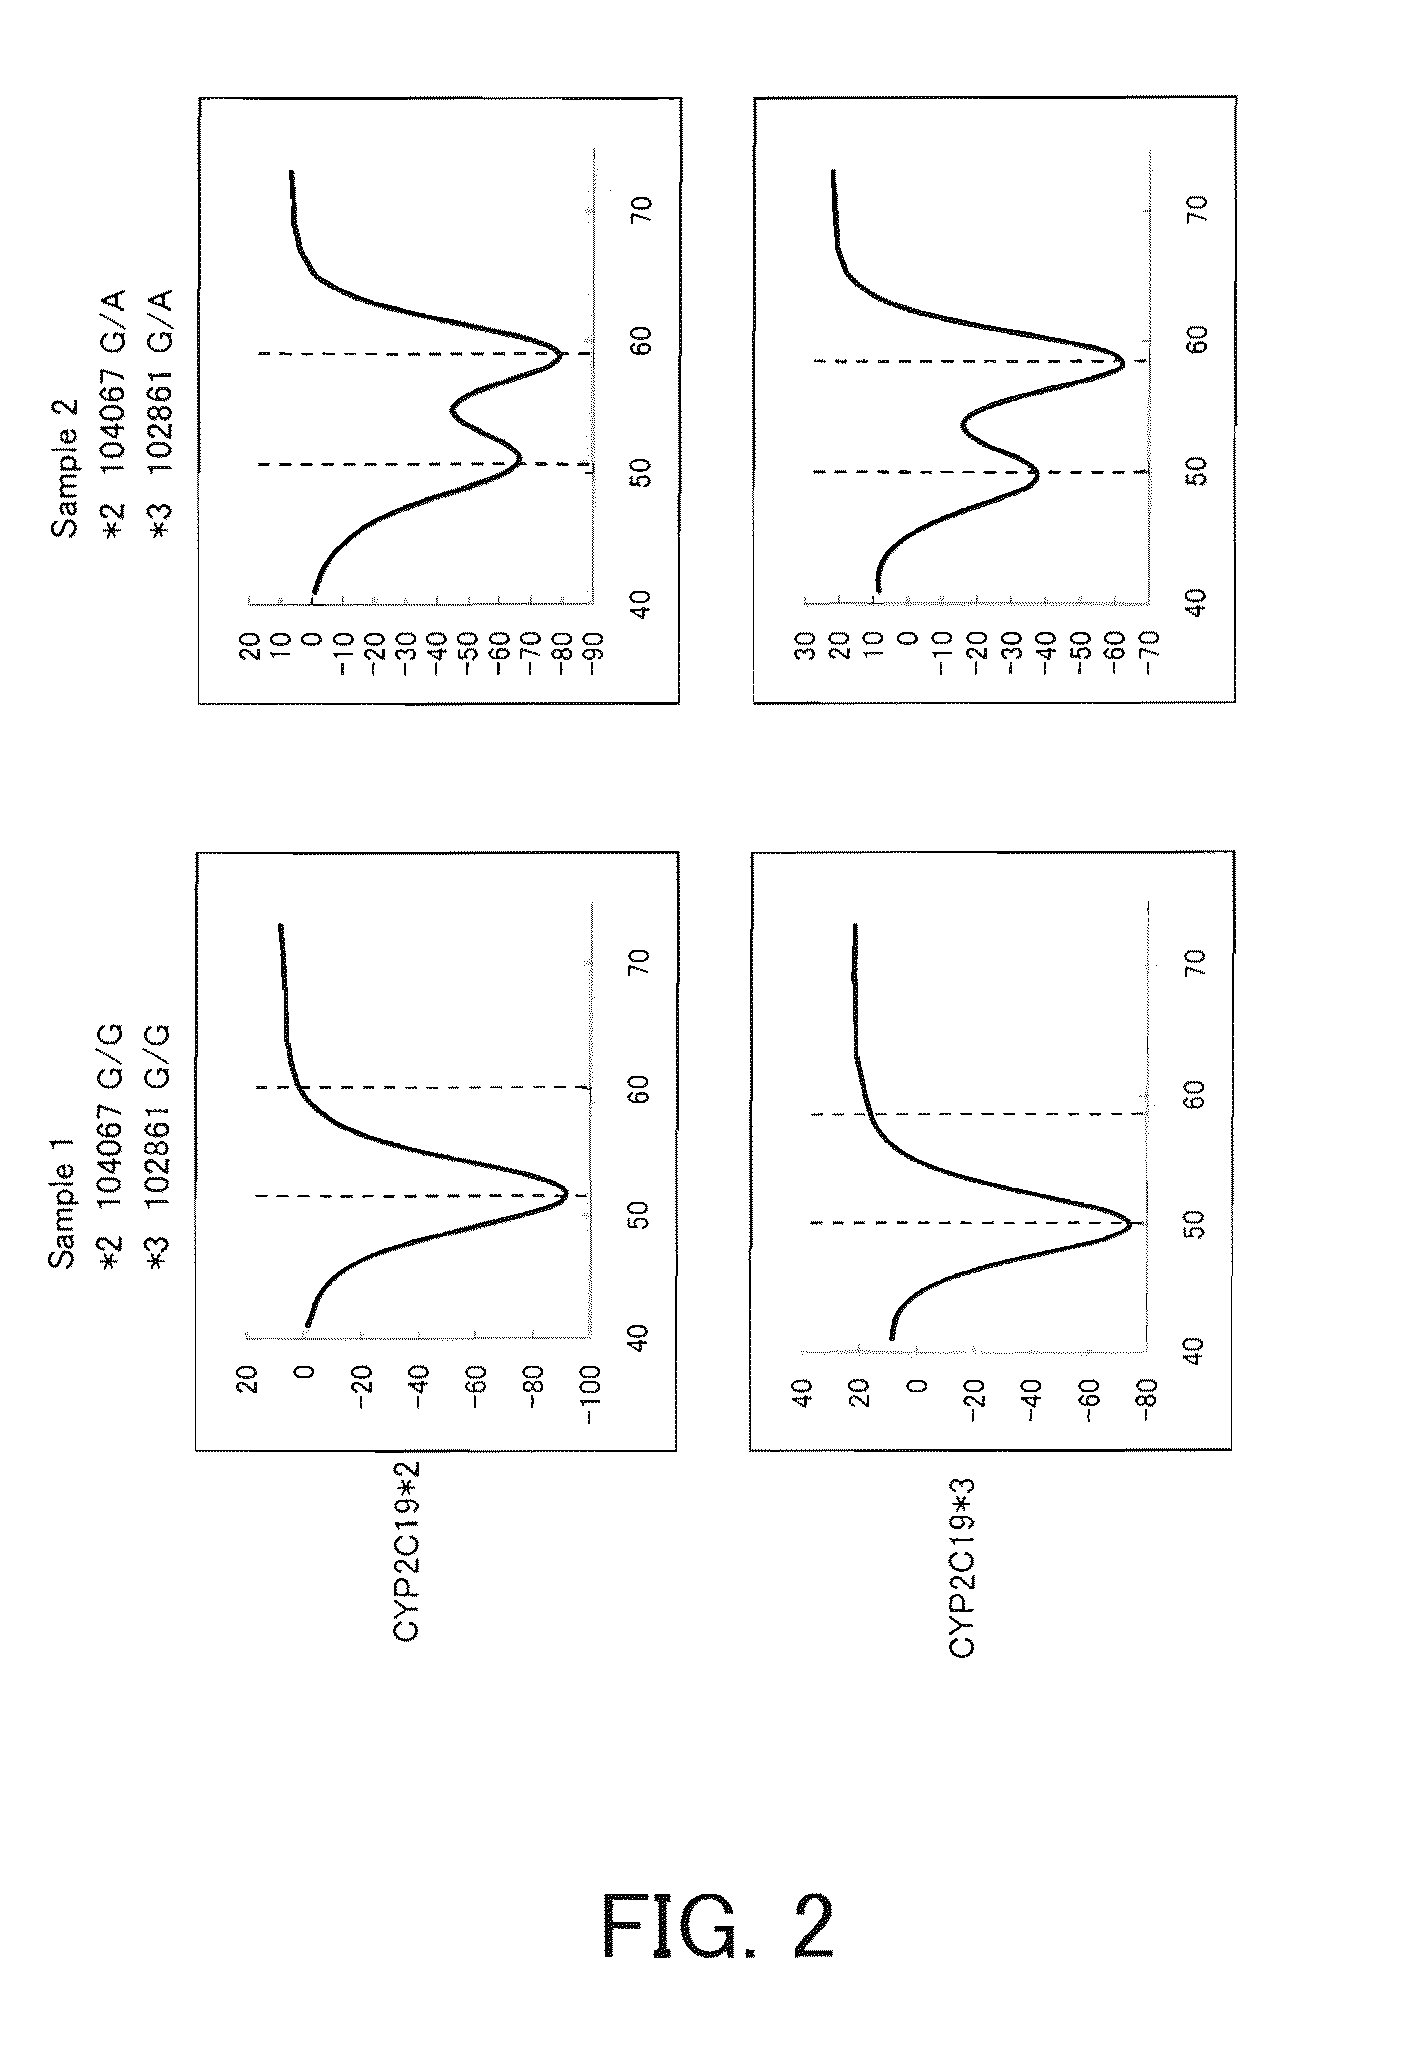 Primer set for amplifying cyp2c19 gene, reagent for amplifying cyp2c19 gene containing the same, and the uses thereof